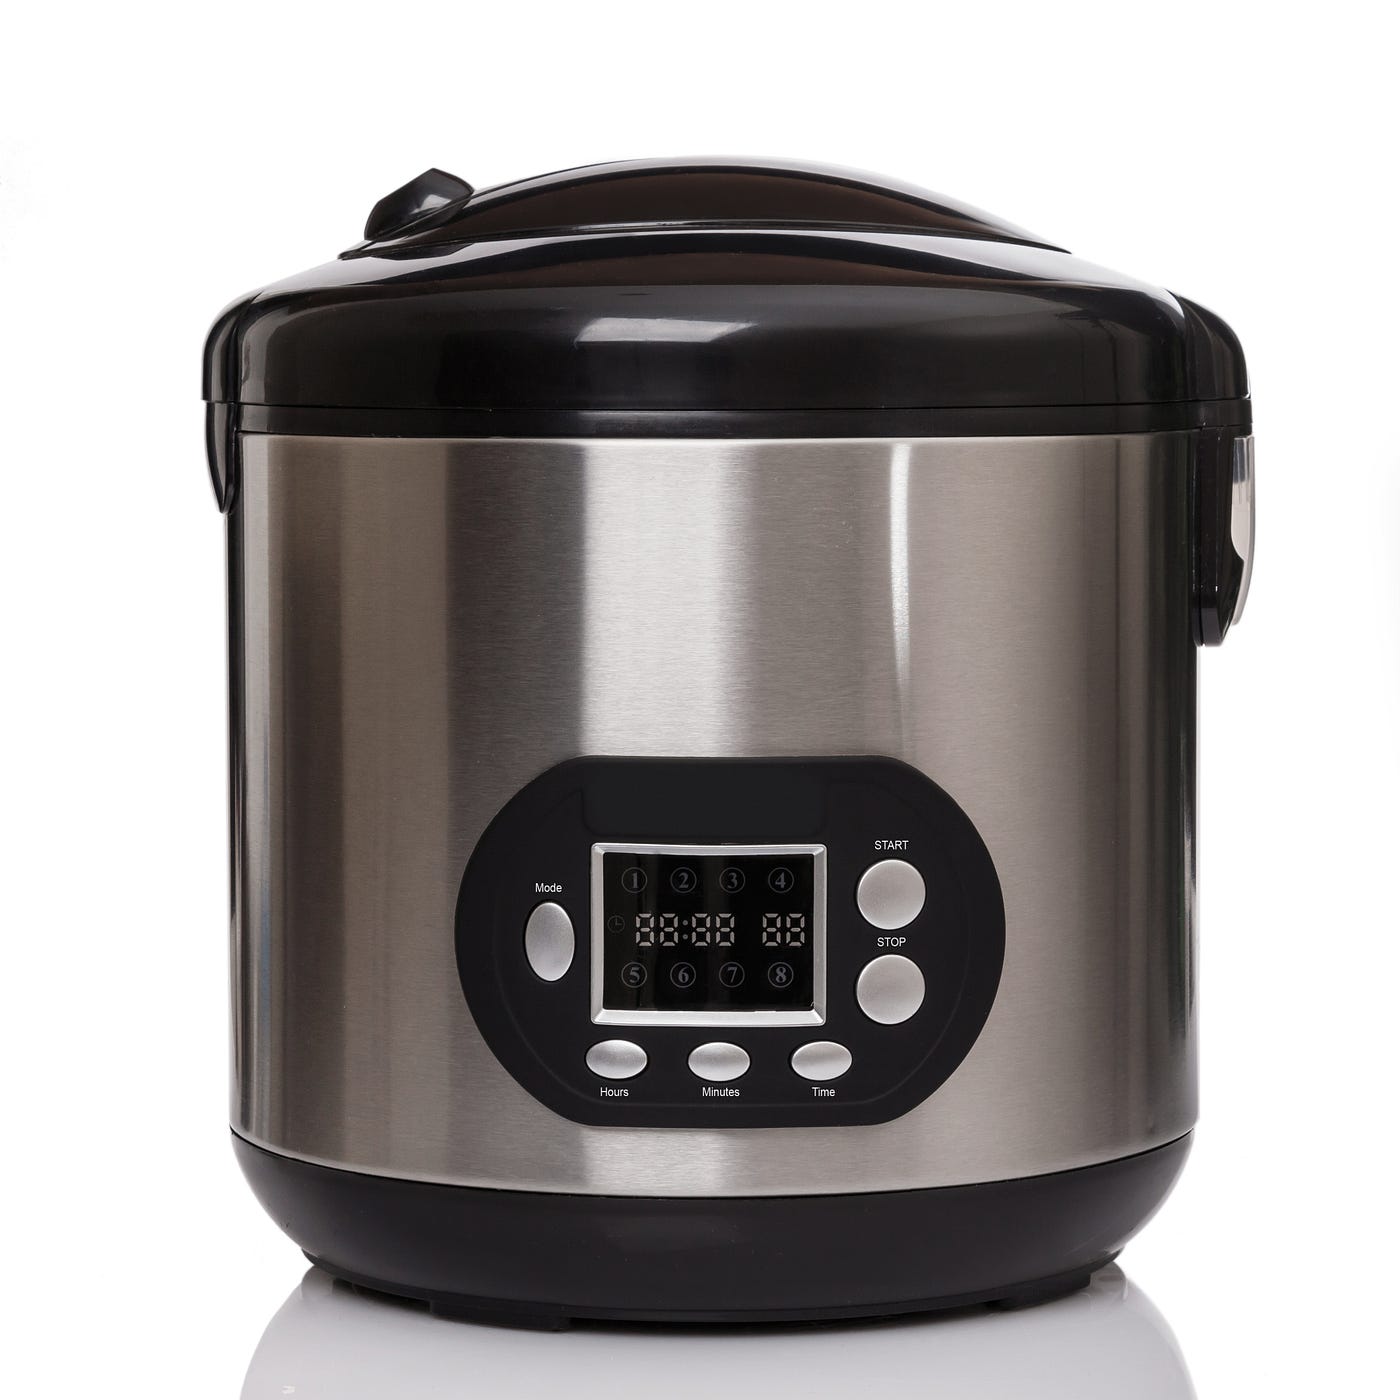 7 Safest Non-Toxic Slow Cookers To Cook Without Worry